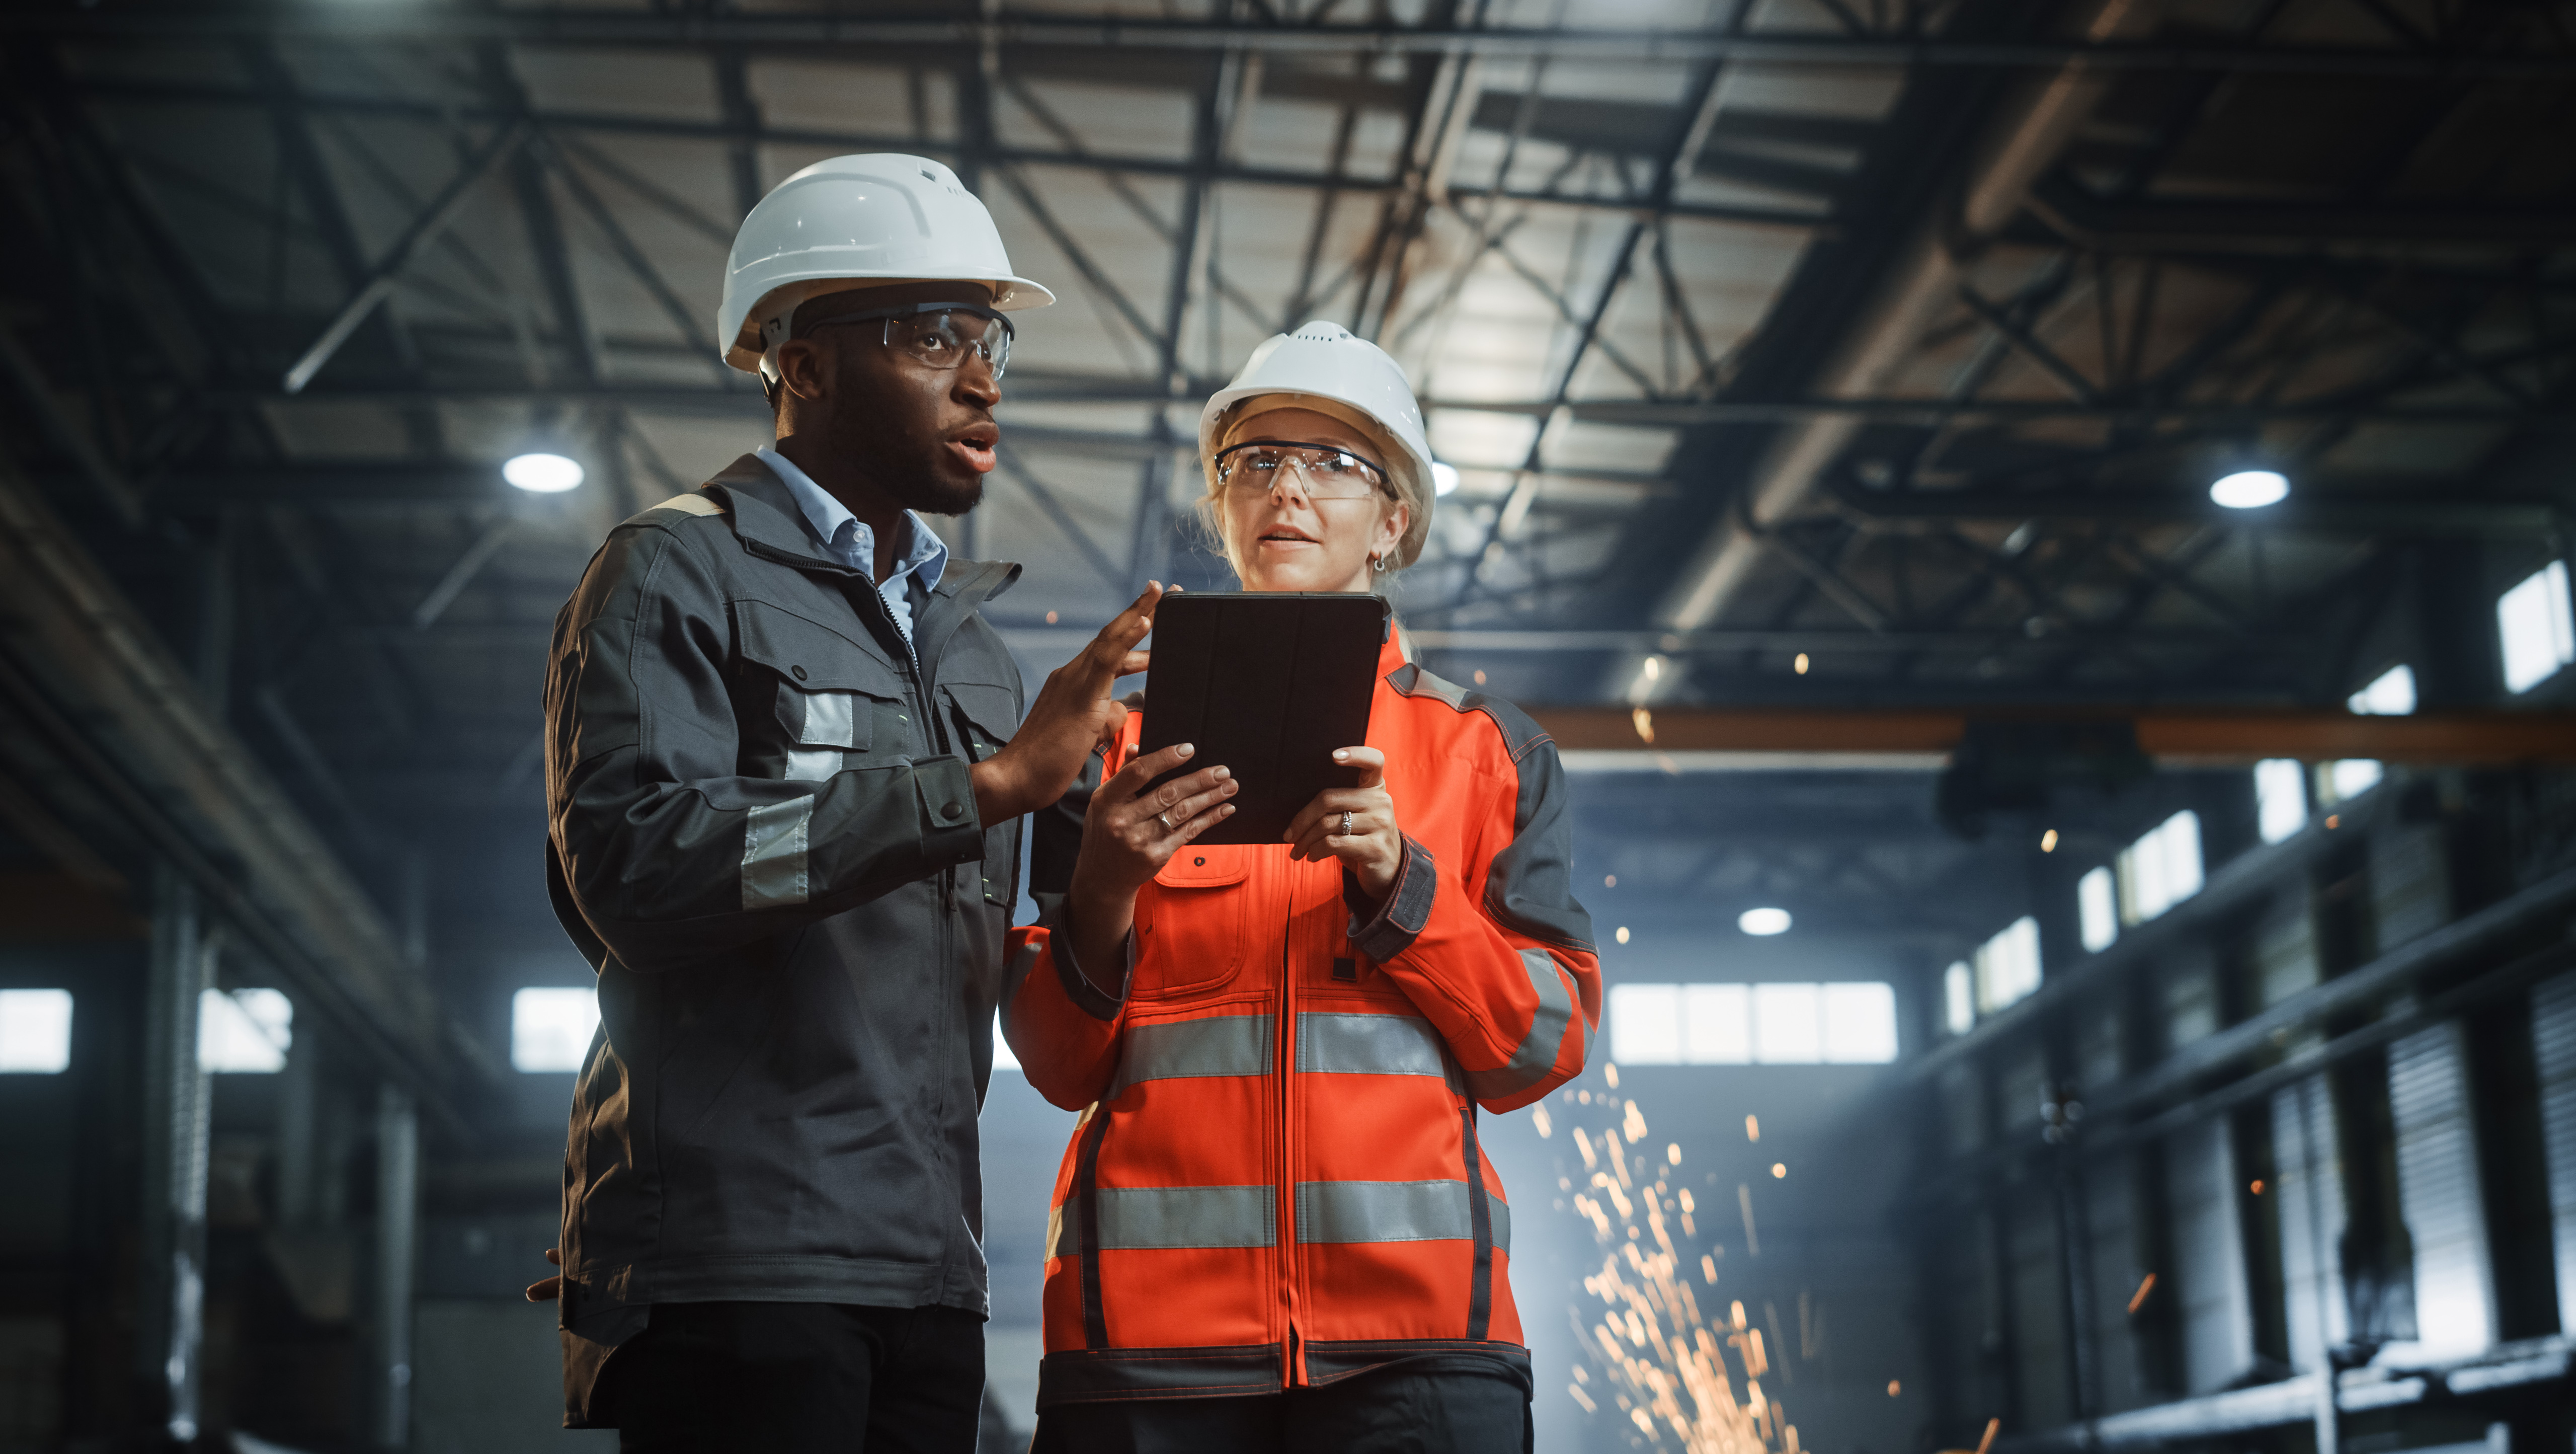 Two people wearing safety gear discussing something on an ipad.